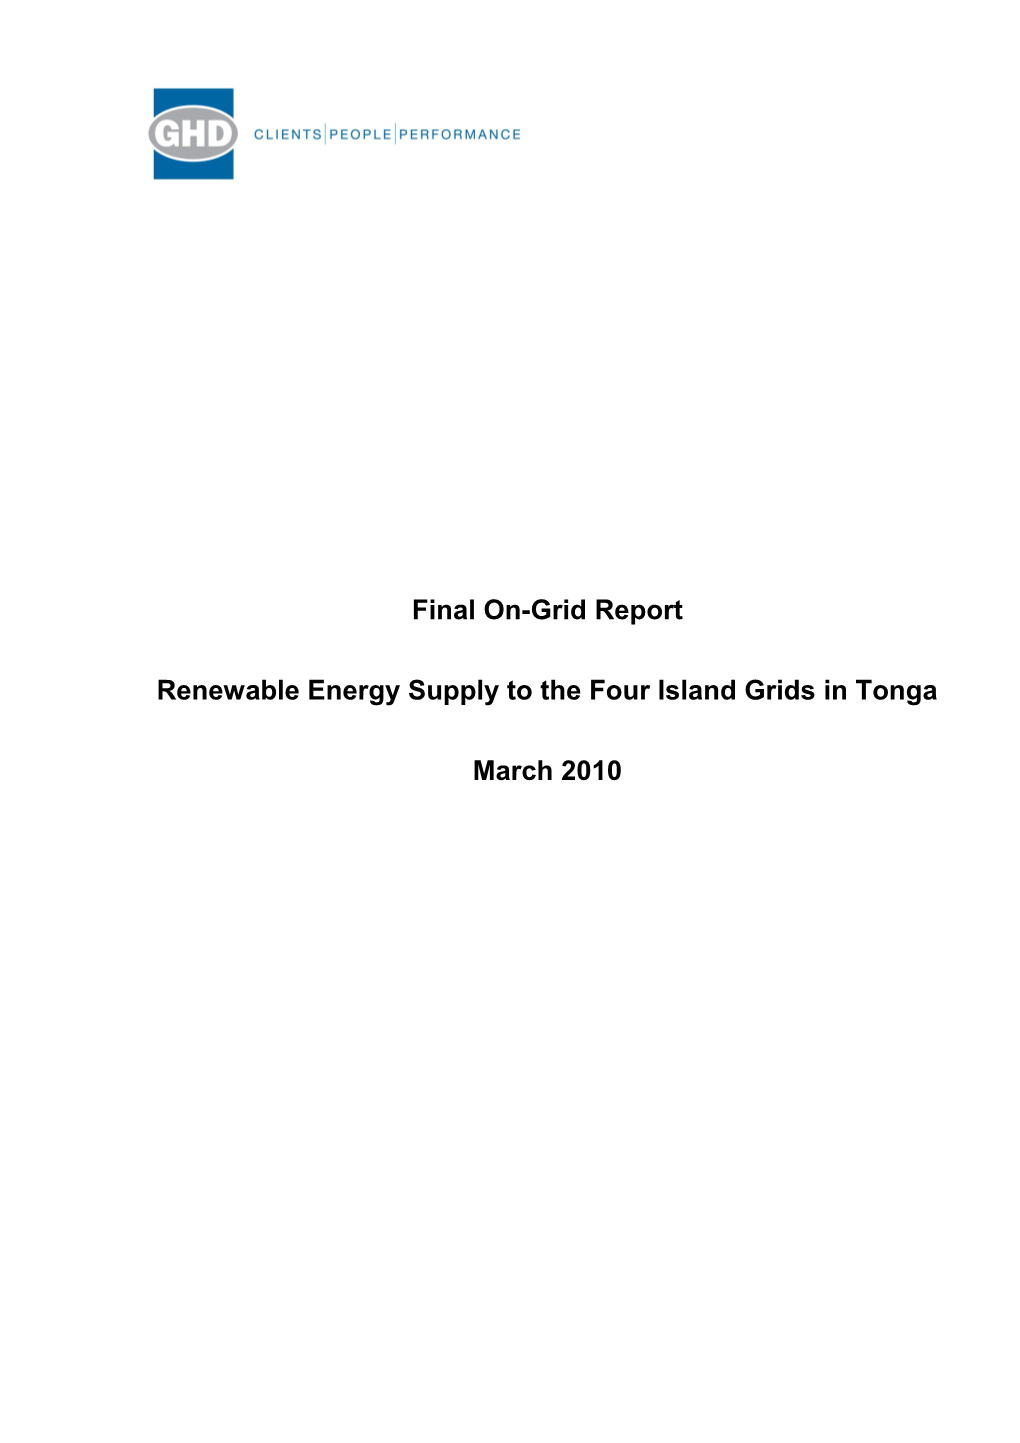 Renewable Energy Supply to the Fourisland Grids in Tonga